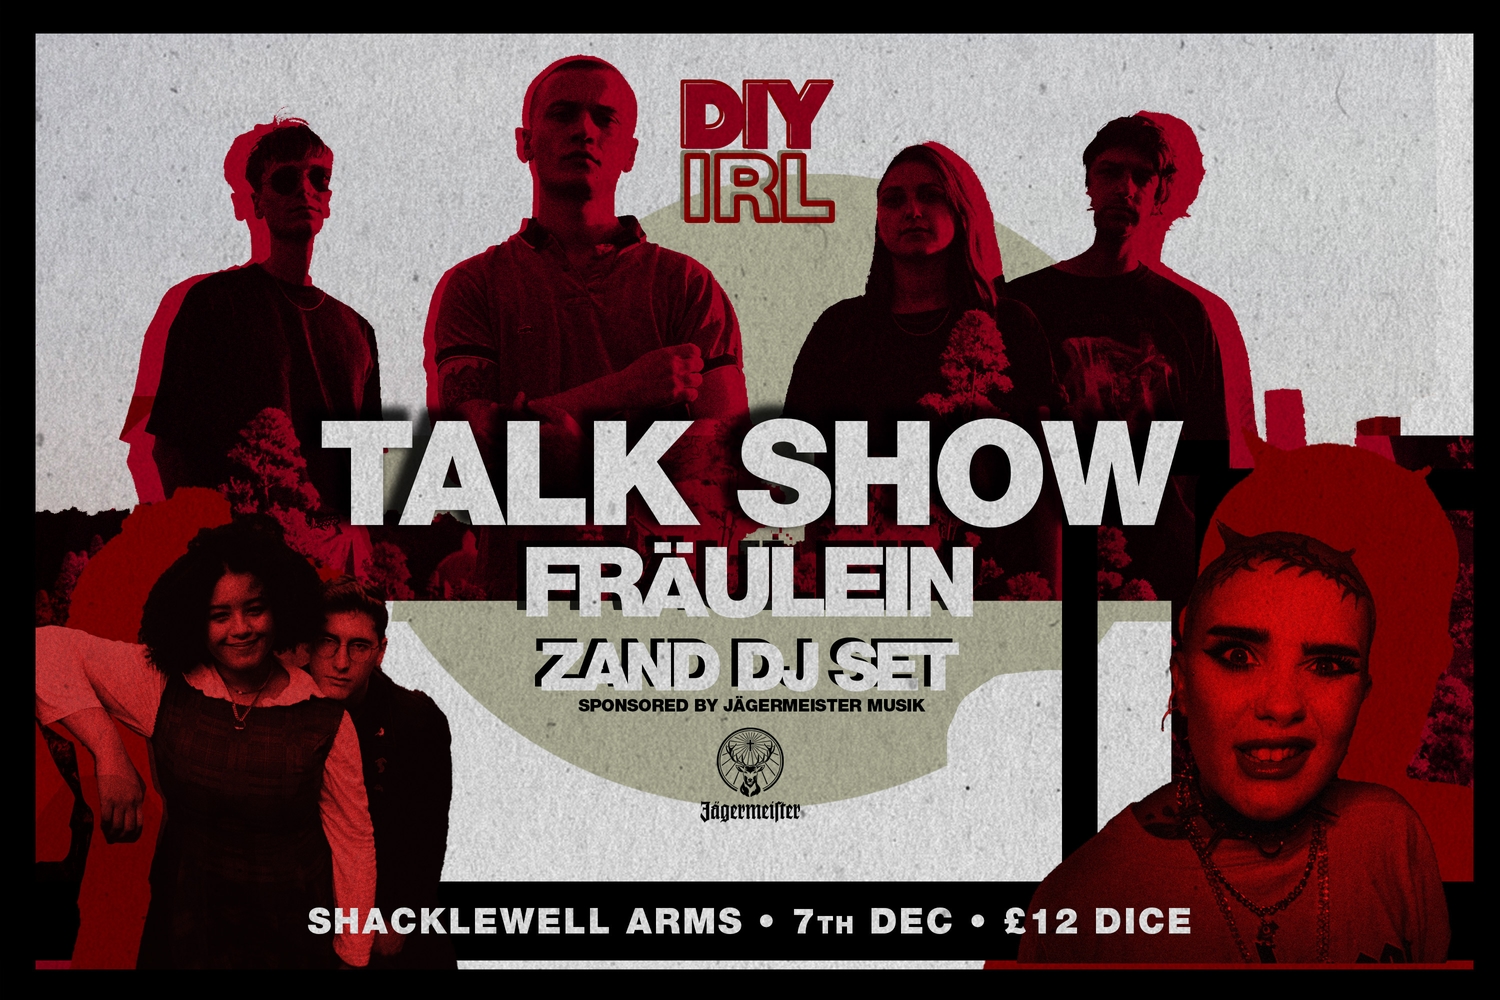 Talk Show, Fräulein and ZAND to play December’s DIY IRL show